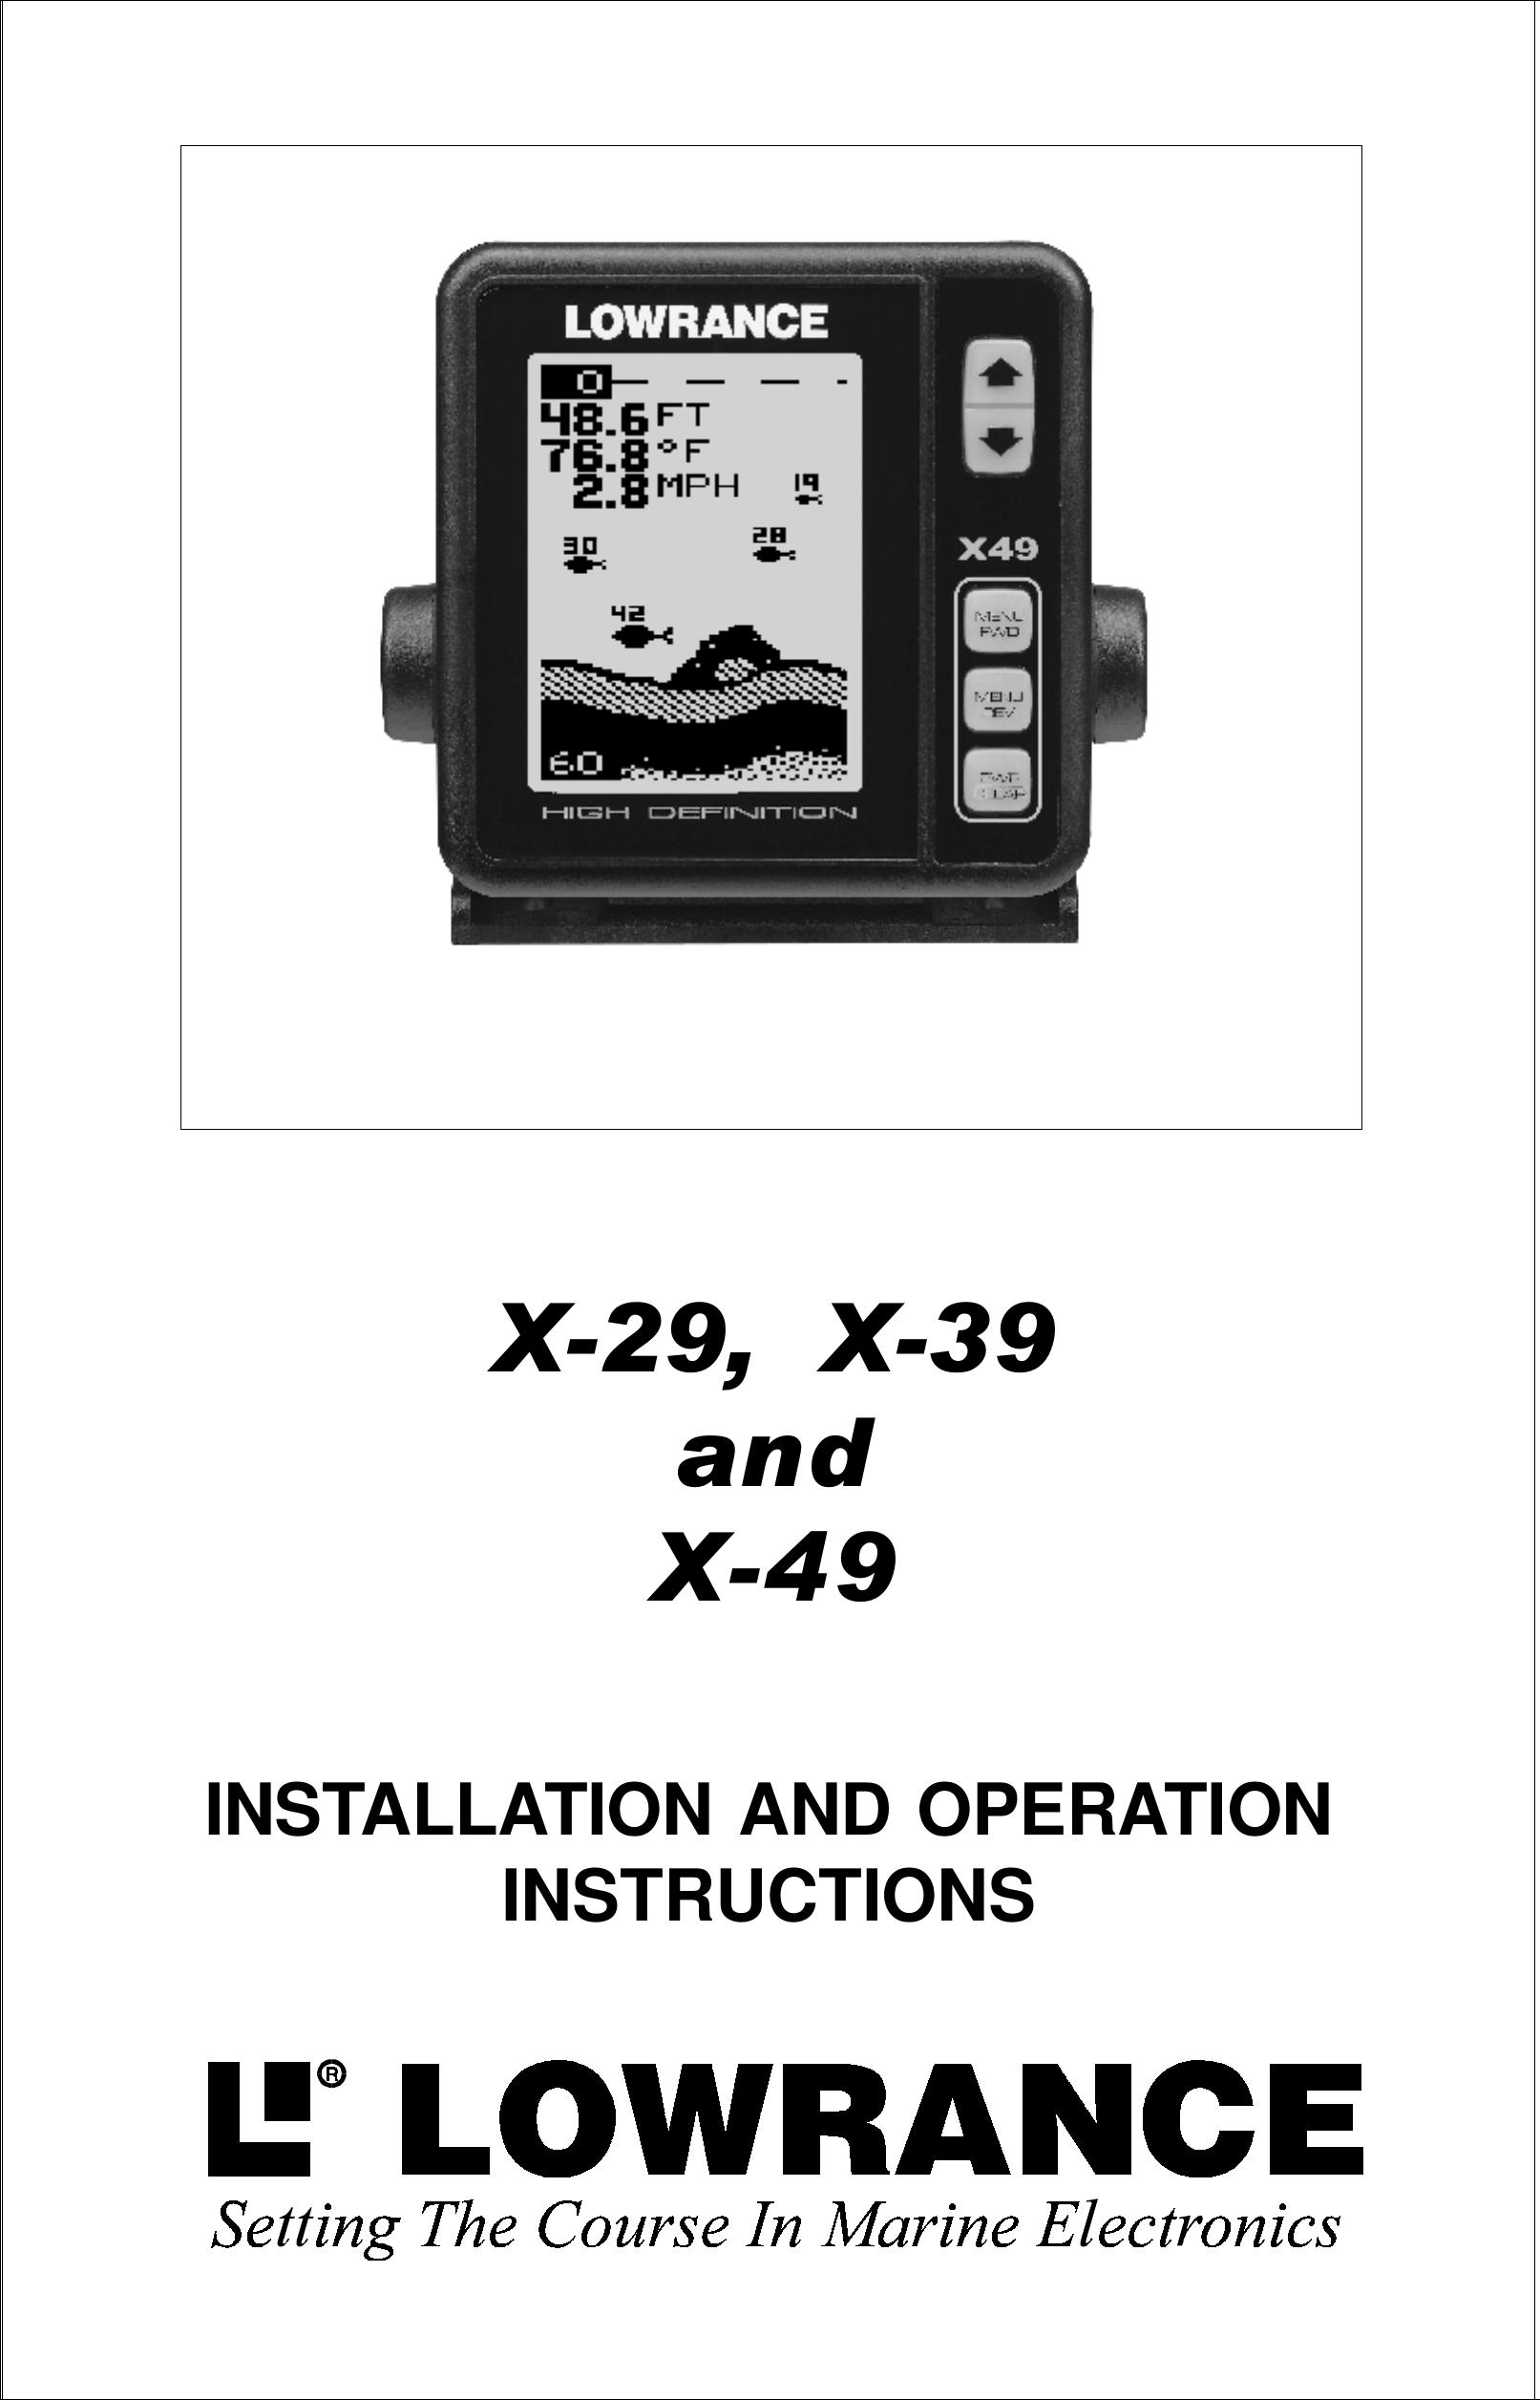 Lowrance electronic X-49 Fish Finder User Manual